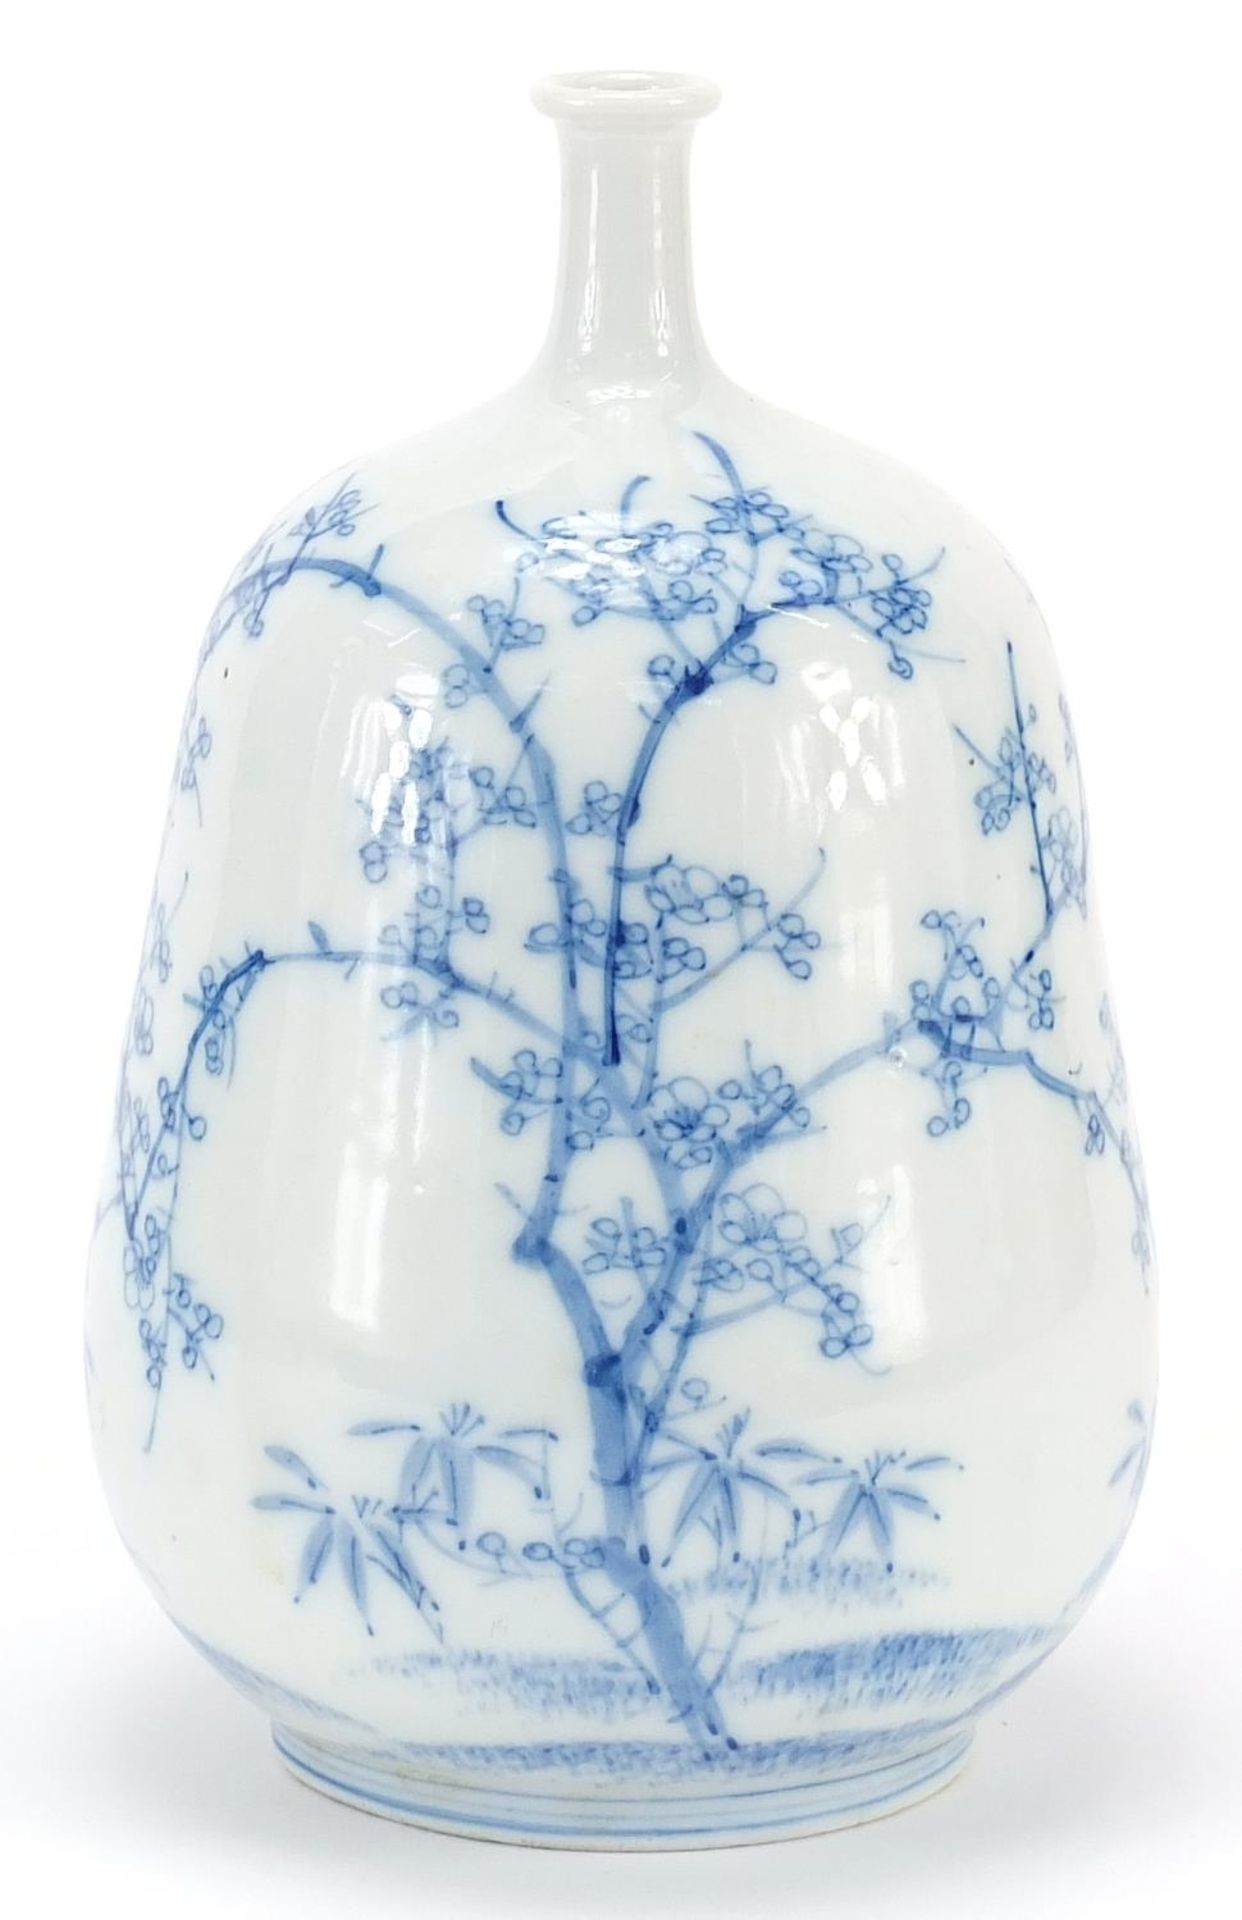 Japanese blue and white porcelain vase hand painted with trees, 23.5cm high